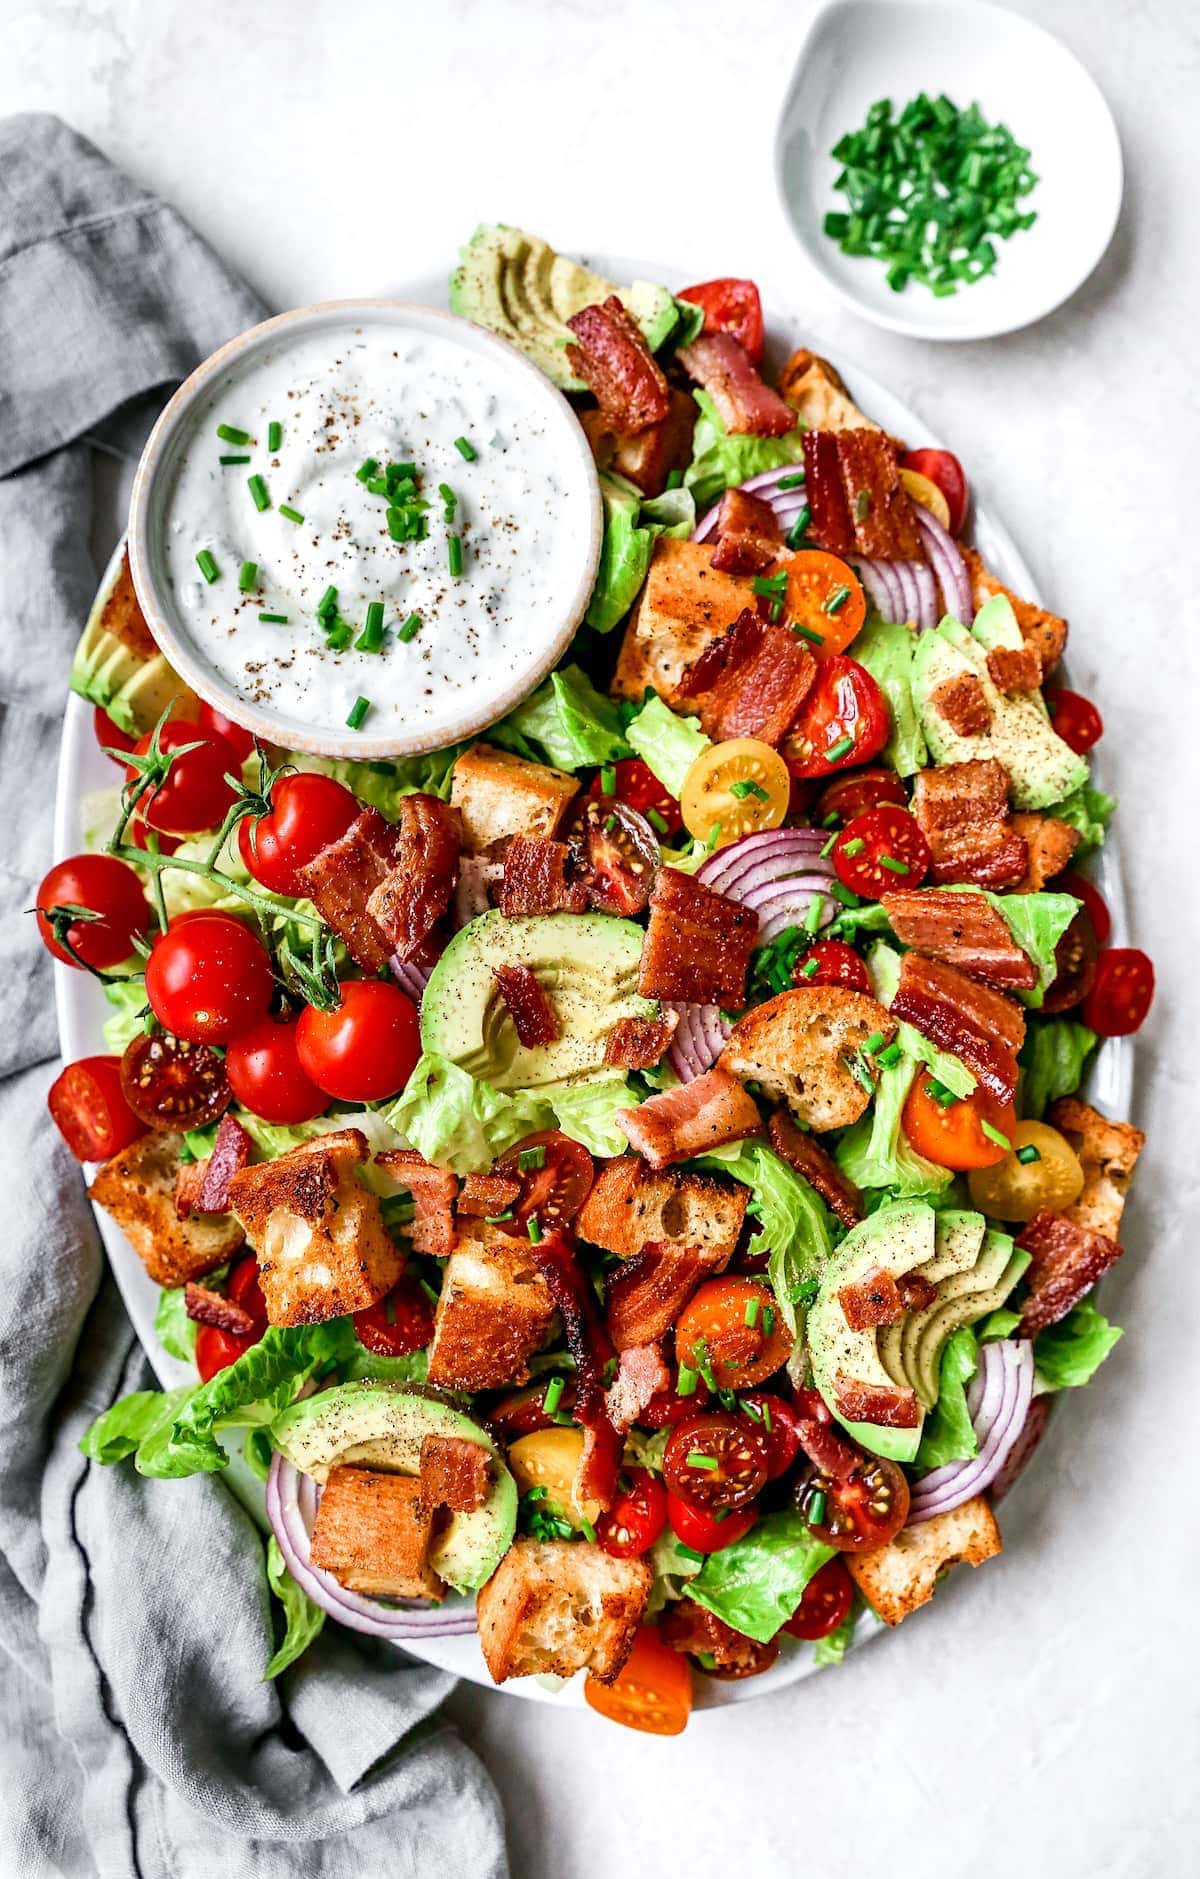 40 Best Salad Recipes {Plus Salad Tips} Two Peas & Their Pod